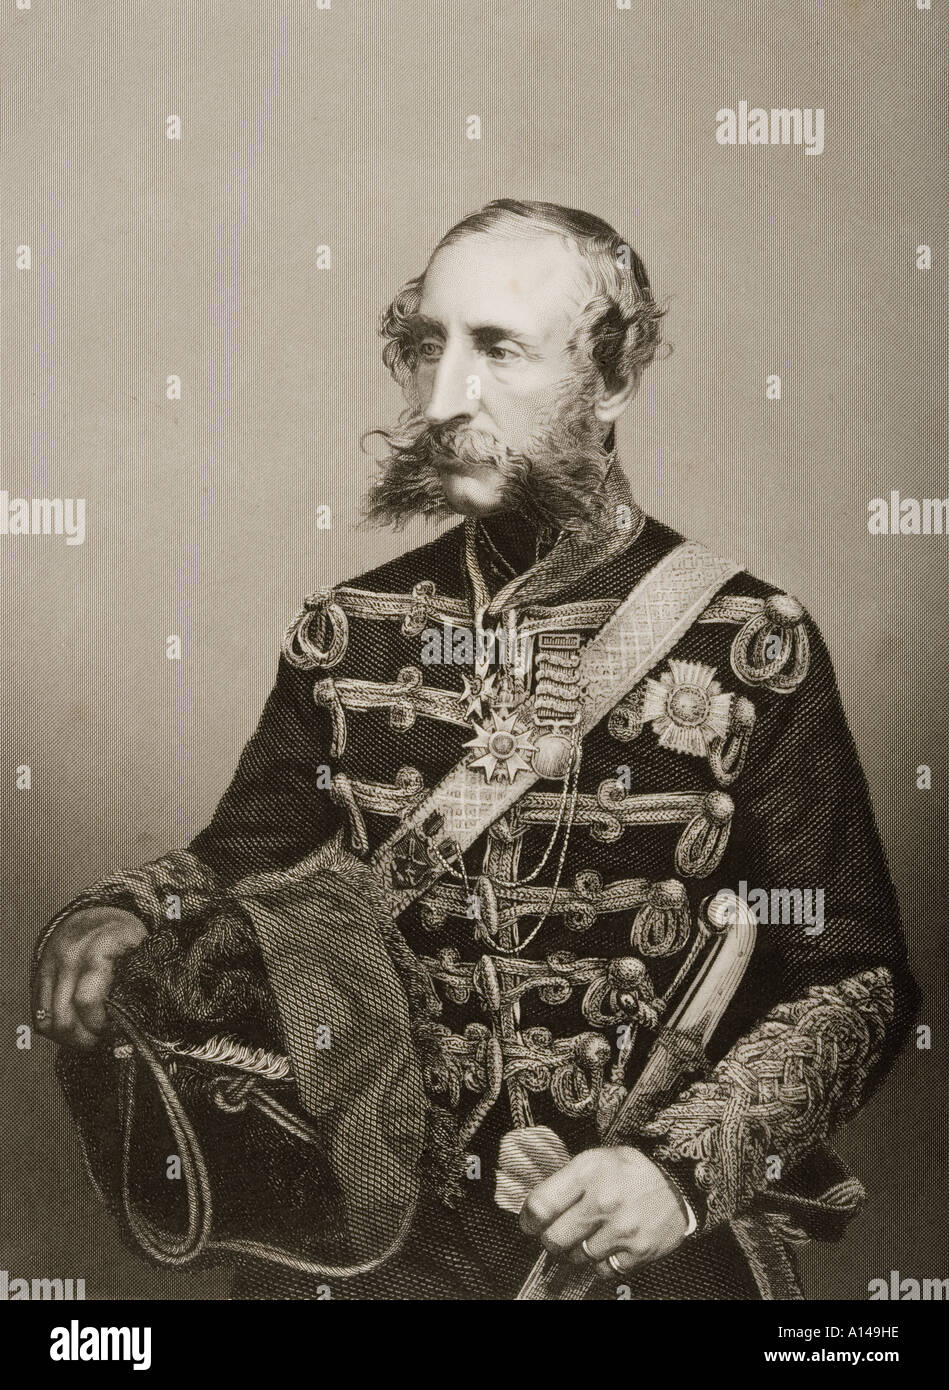 Lieutenant-General James Thomas Brudenell, 7th Earl of Cardigan,1797 - 1868.  Officer in the British Army, commander of the Light Brigade. Stock Photo